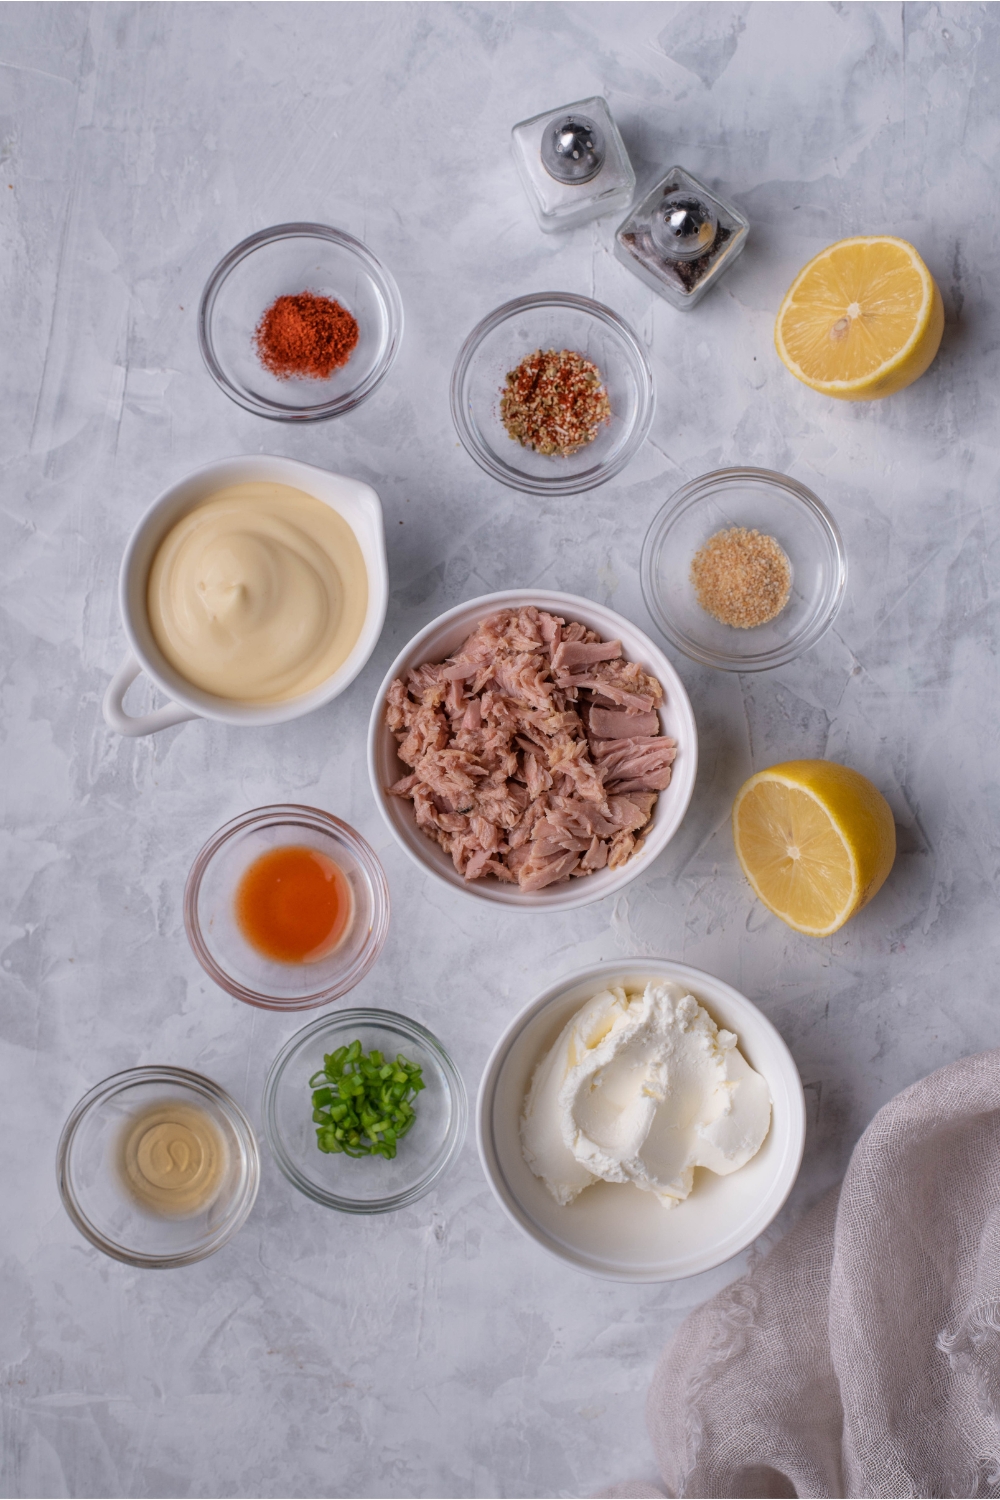 An assortment of ingredients including bowls of mayo, canned tuna, cream cheese, spices, two lemon halves, and salt and pepper shakers.